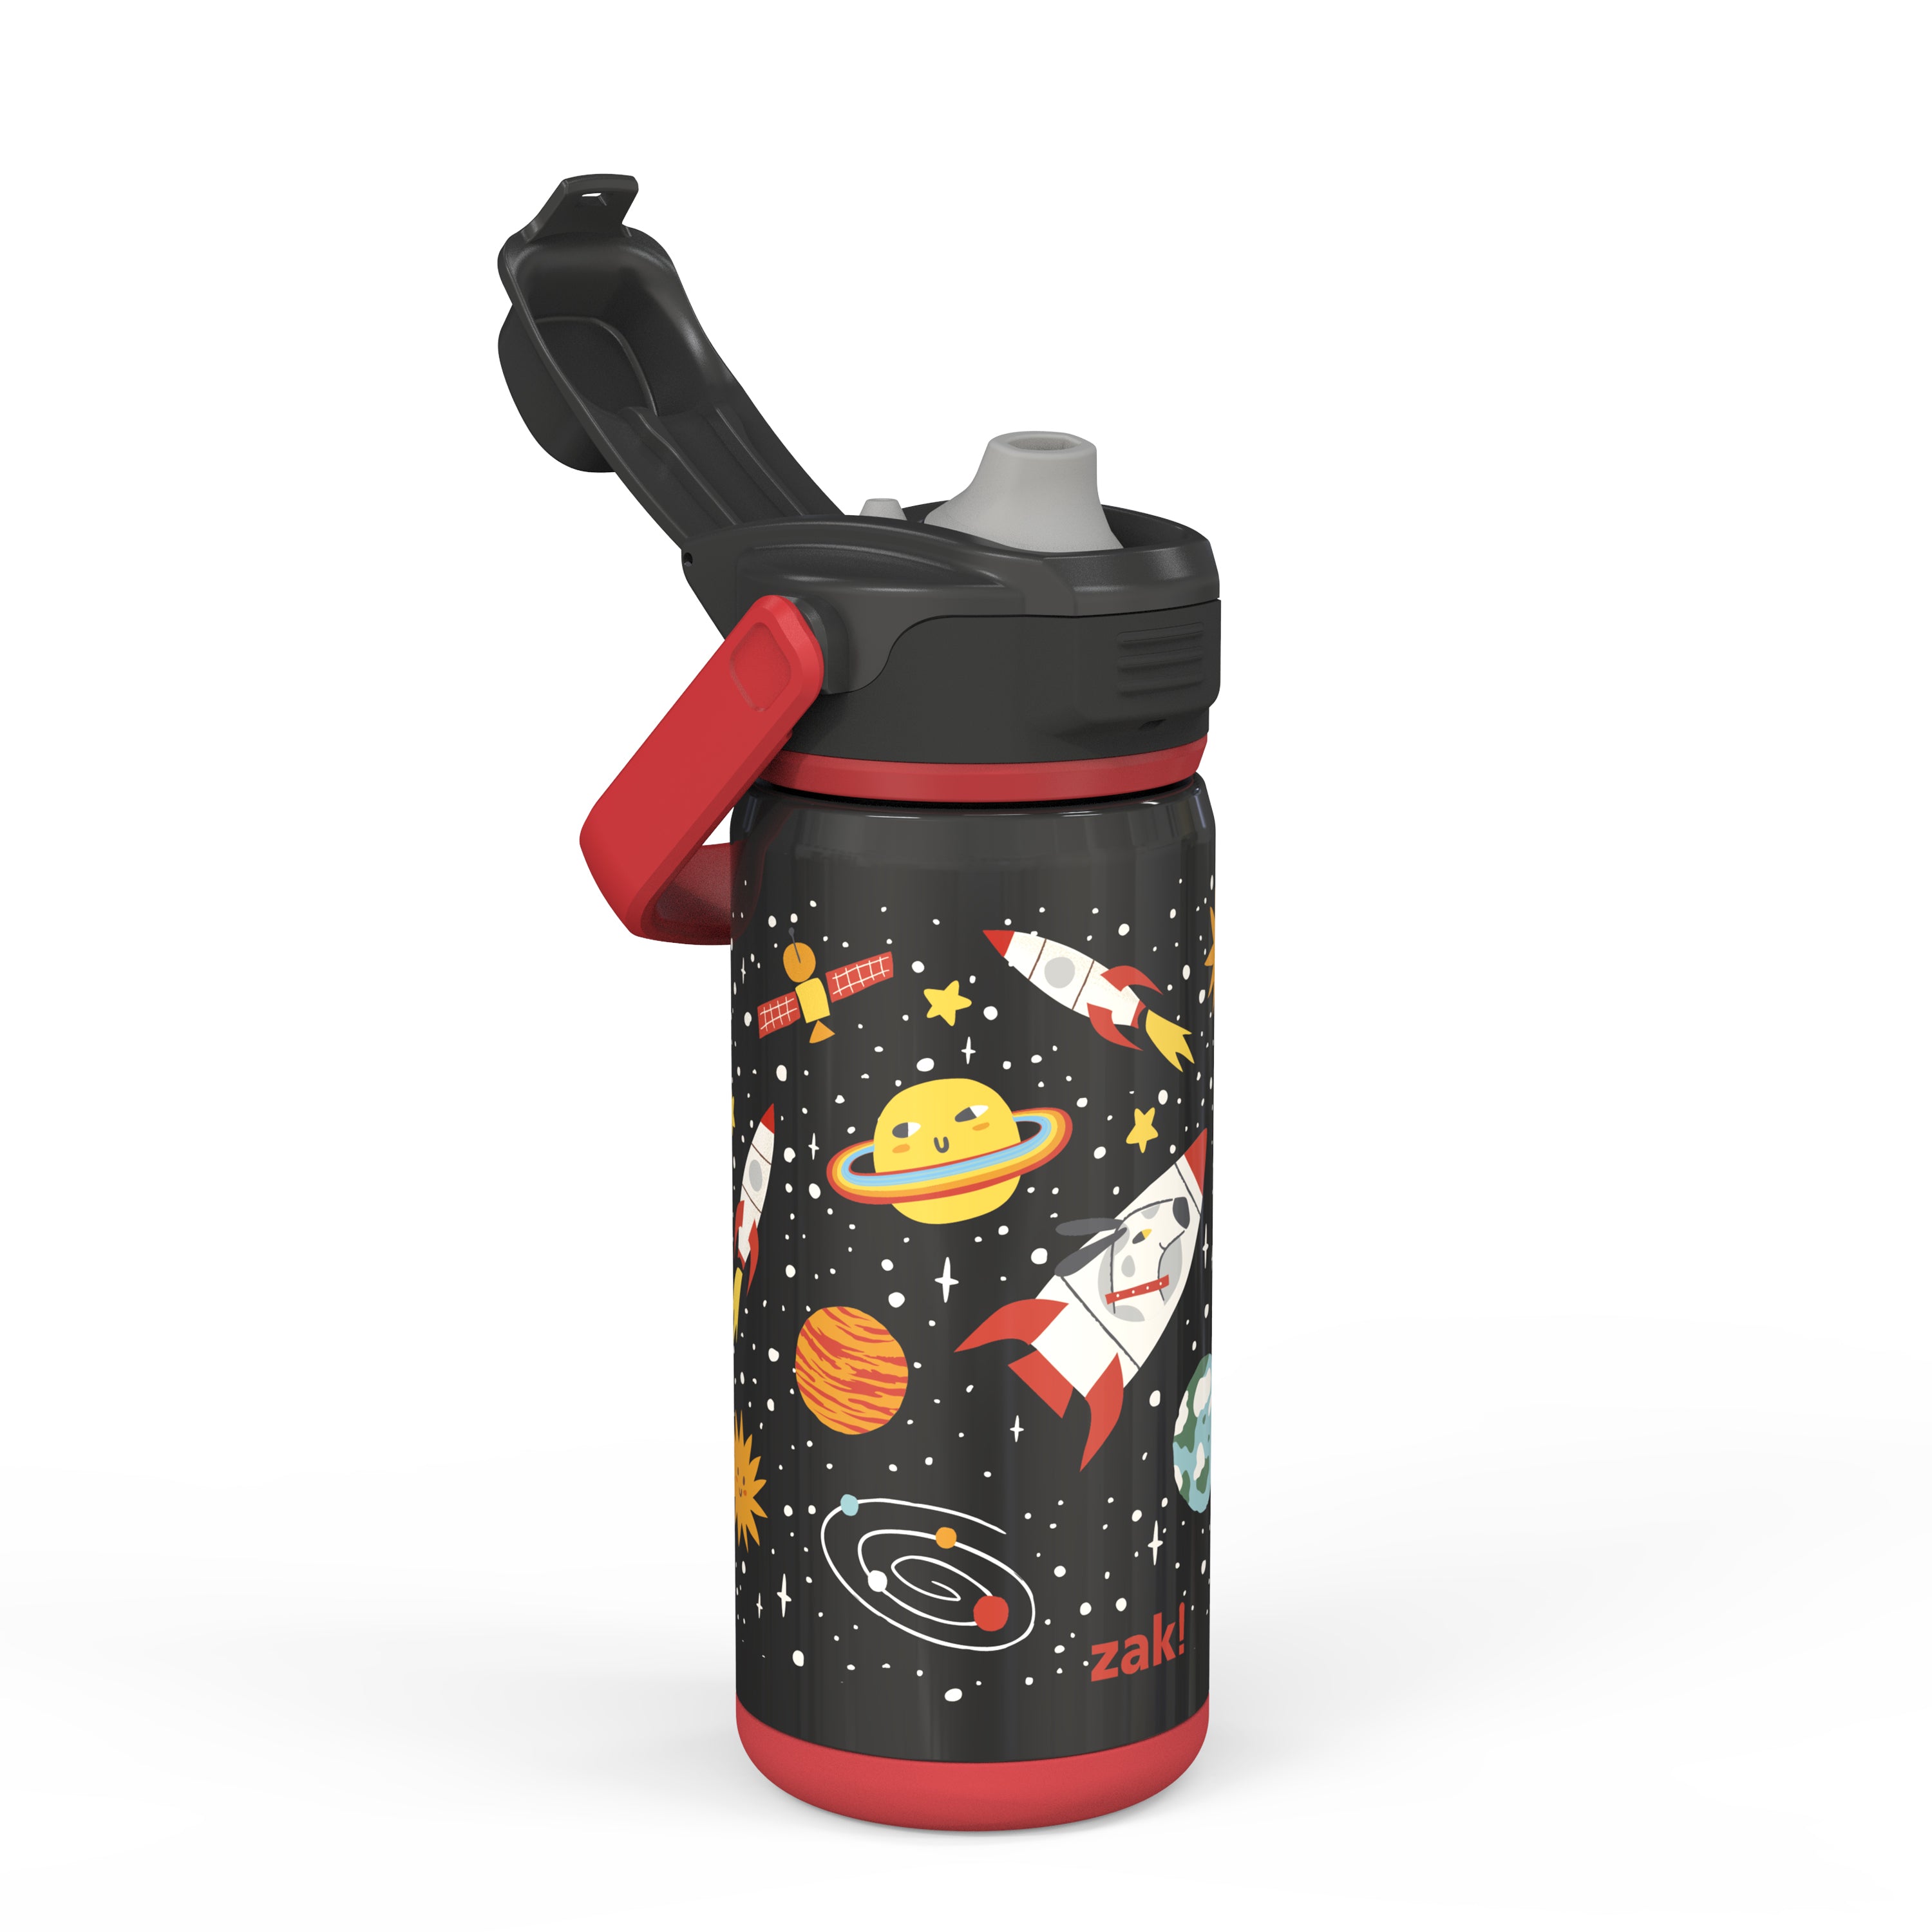 Beacon Stainless Steel Insulated Kids Water Bottle with Covered Spout - Spaceships, 14 Ounces